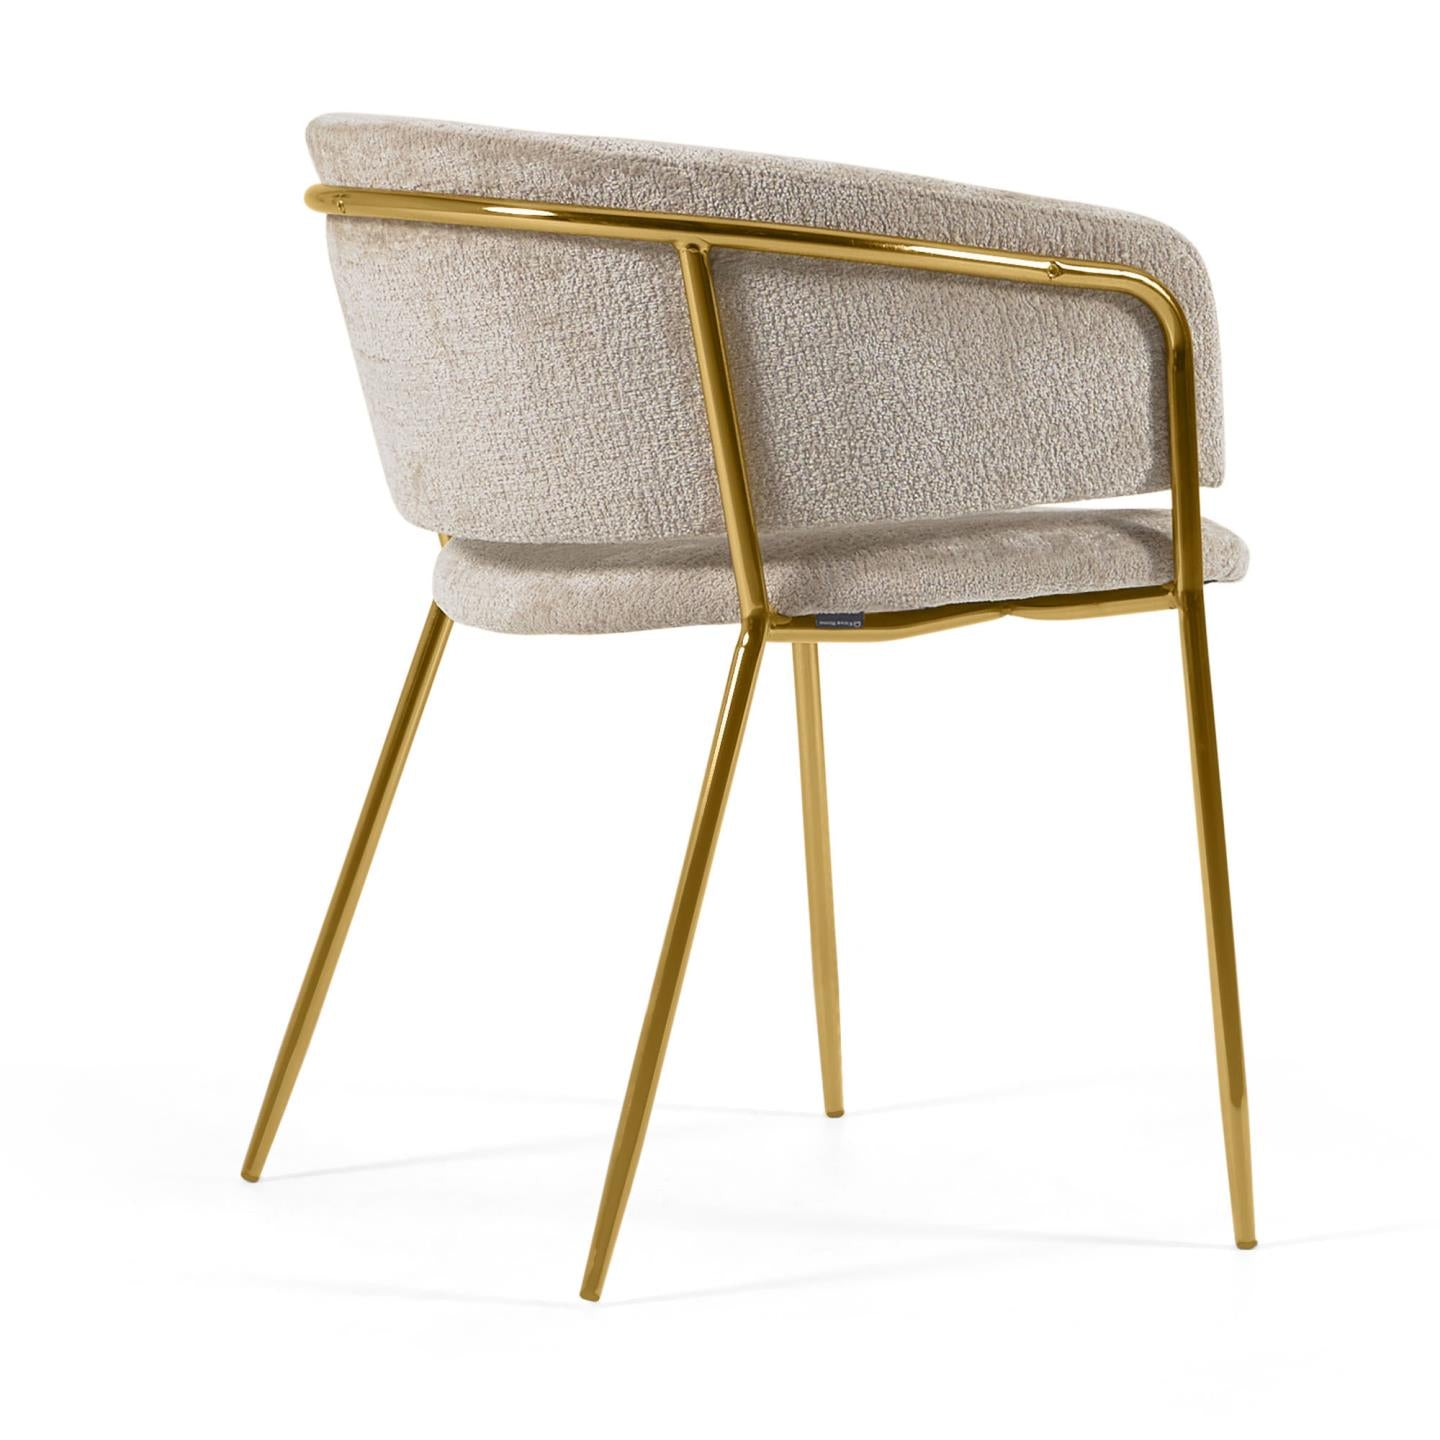 Runnie chair in beige chenille with steel legs and gold finish